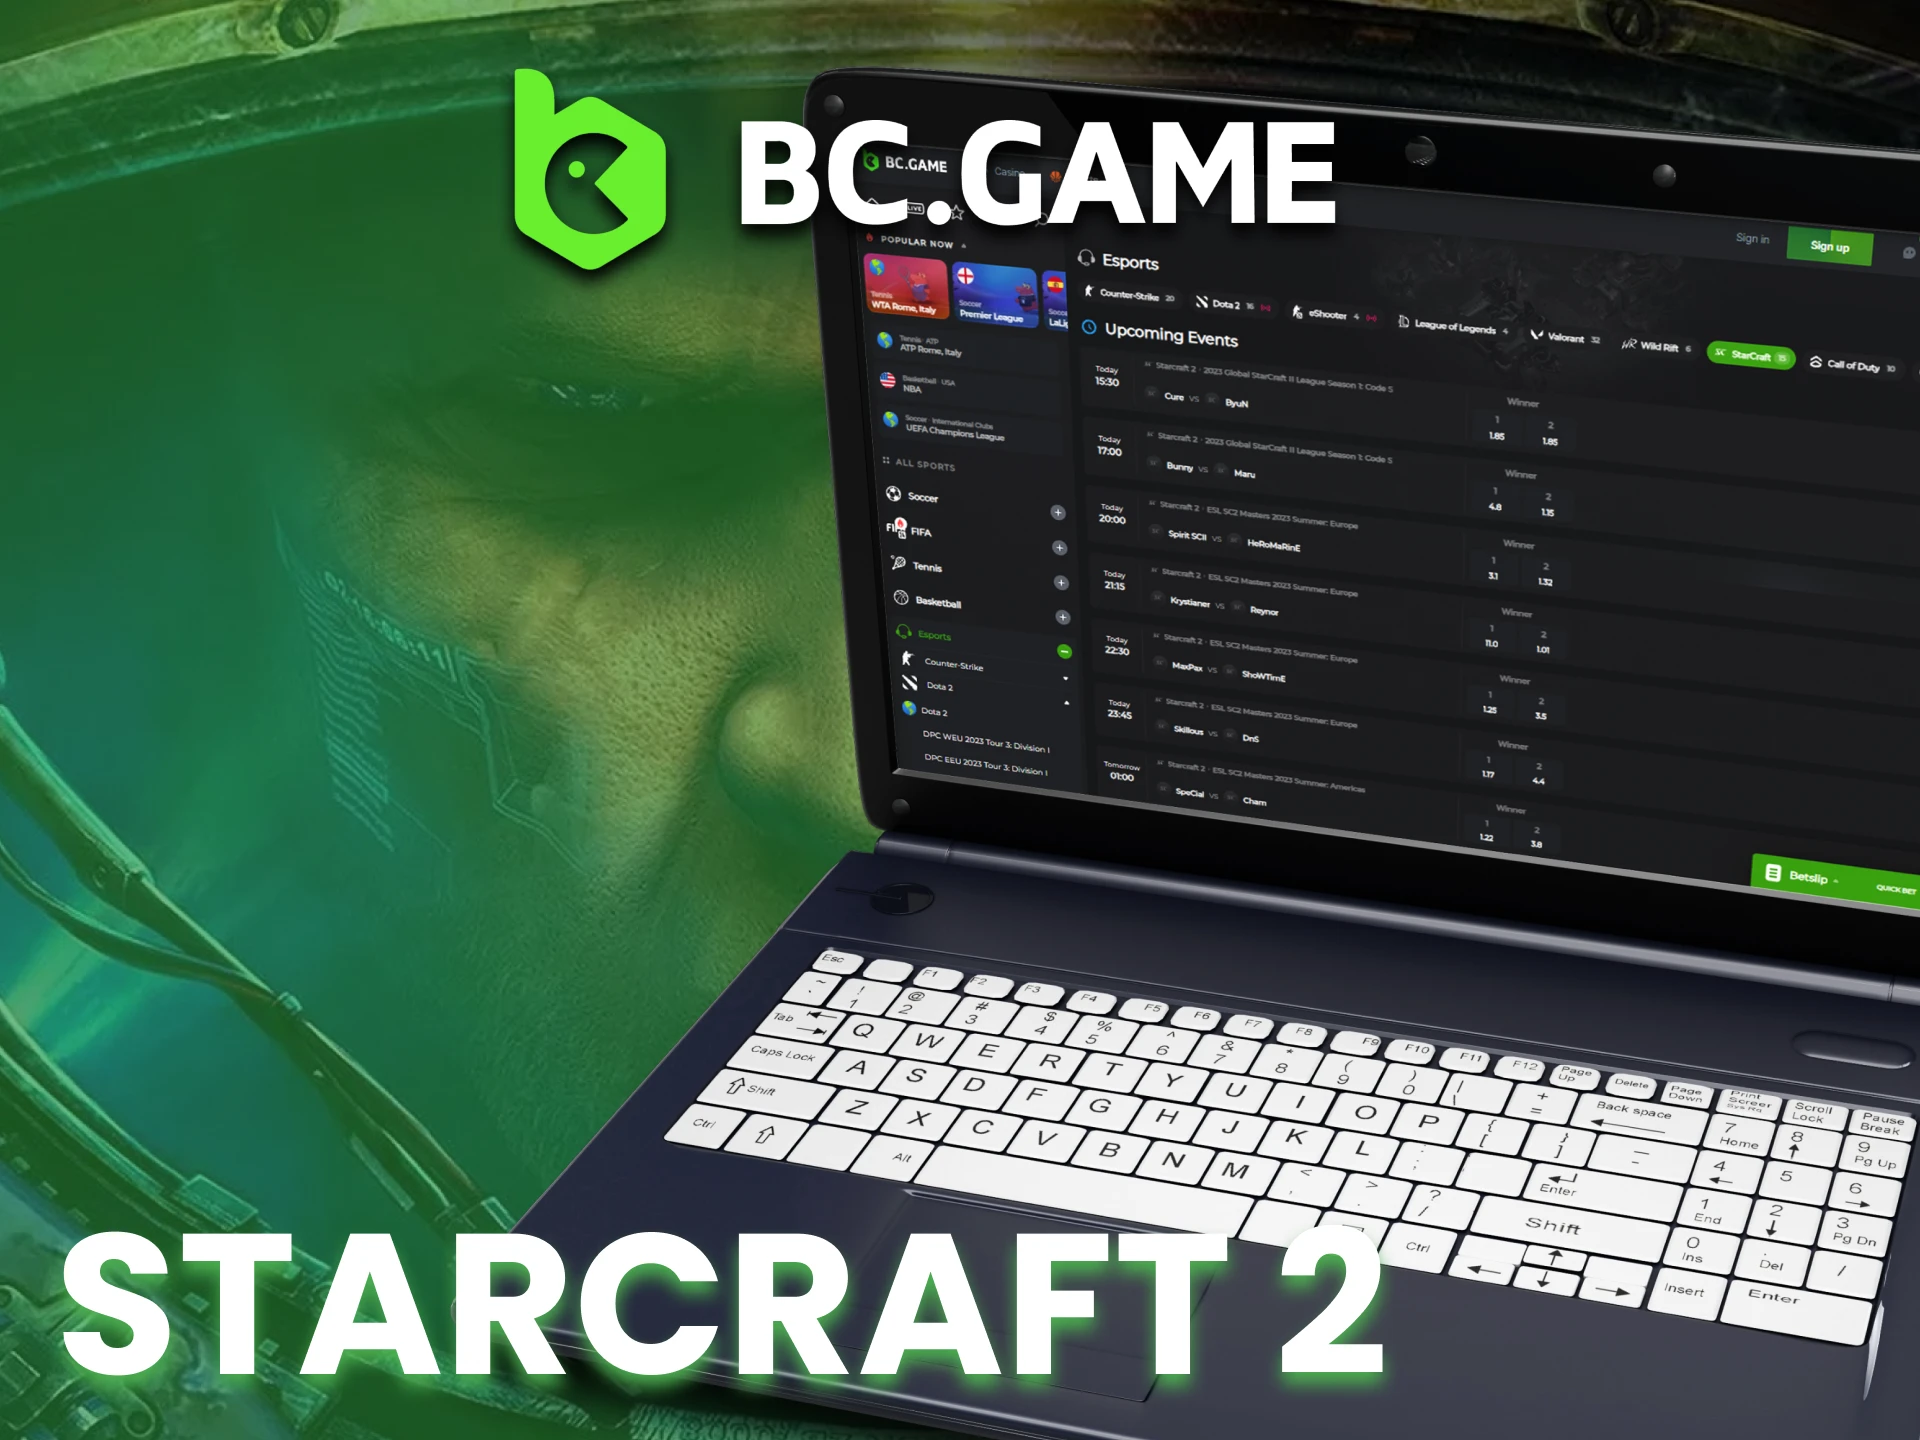 Starcraft 2 is a great esports dicipline for betting at BC Game.